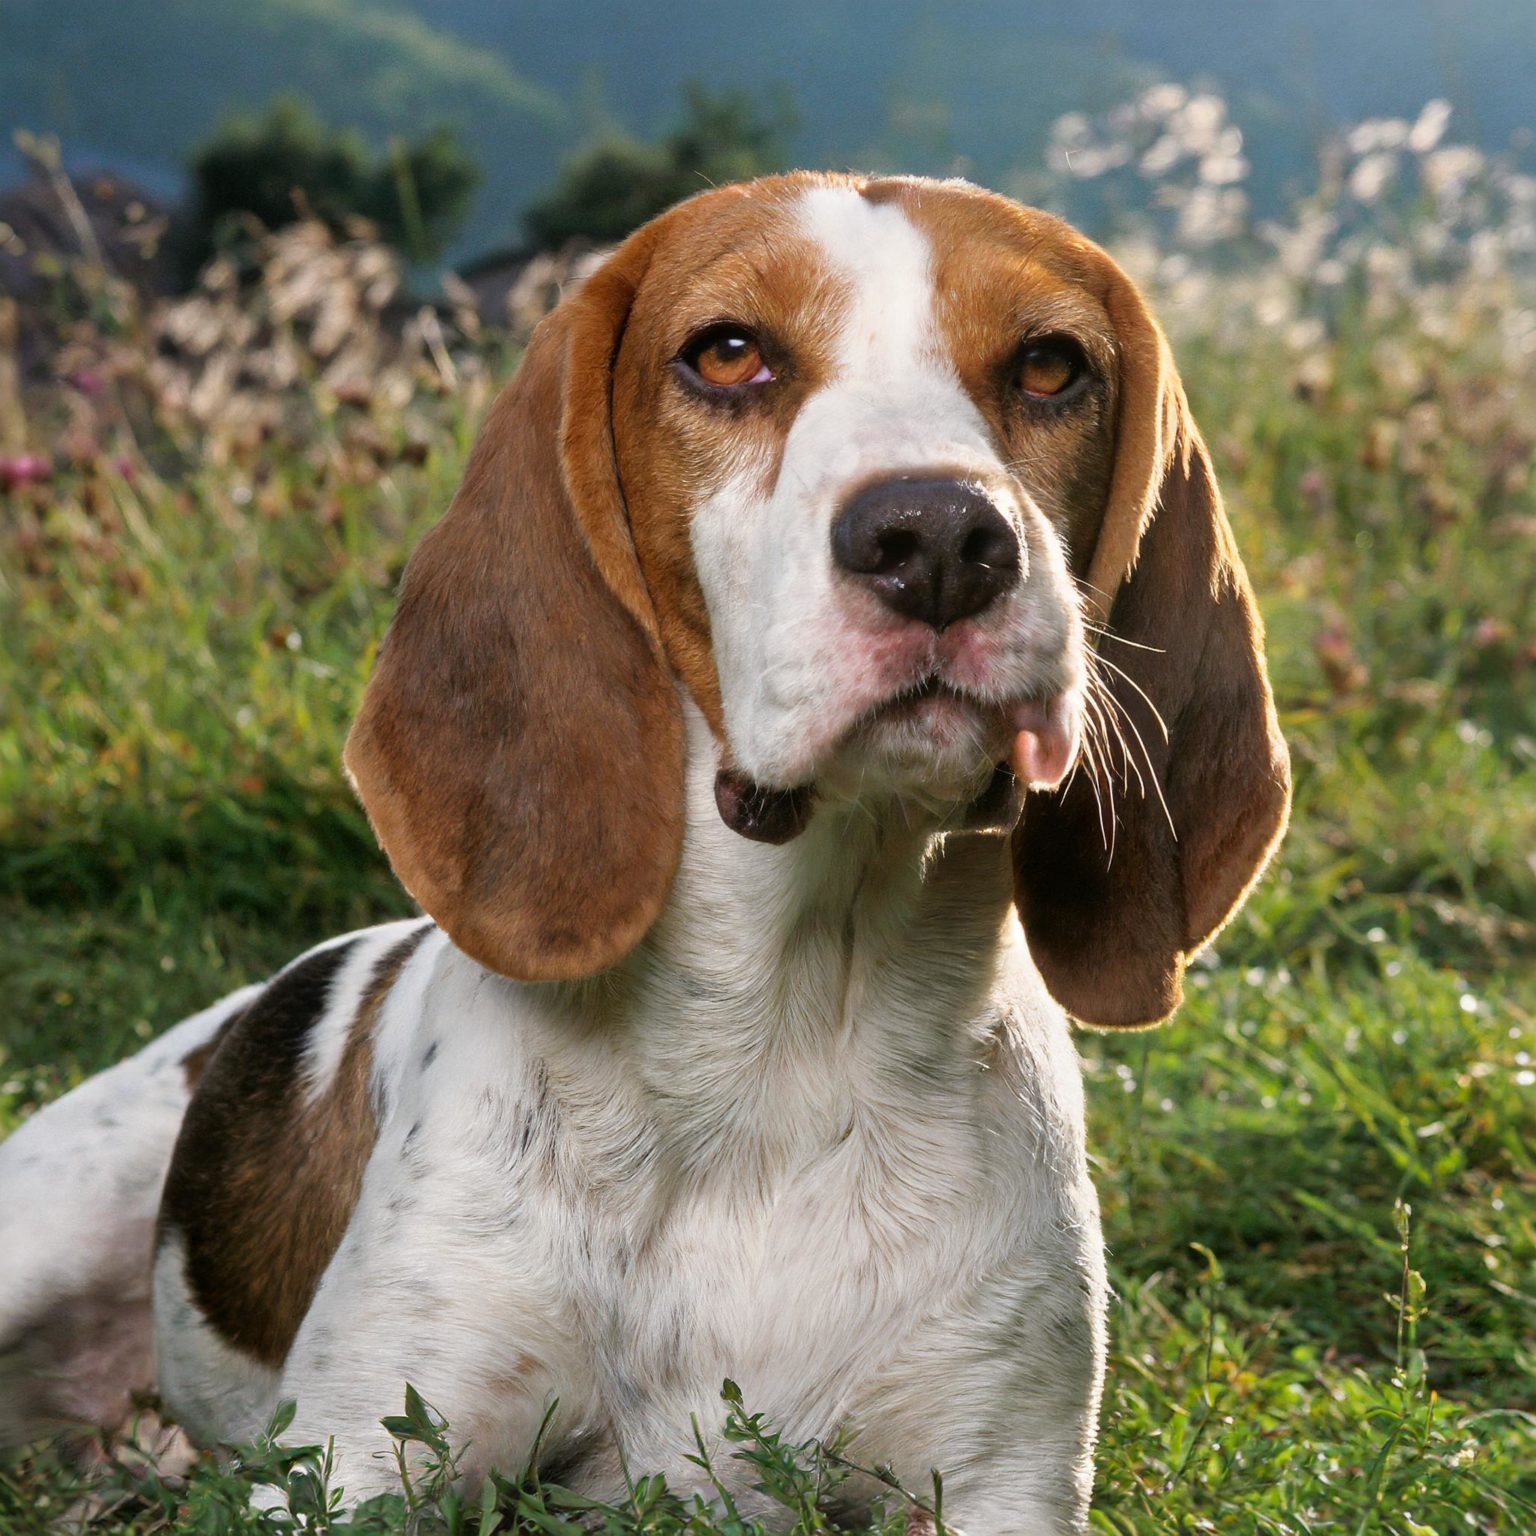 The Anglo-Français de Petite Vénerie is the perfect balance of parameters between the French and English hound breeds.